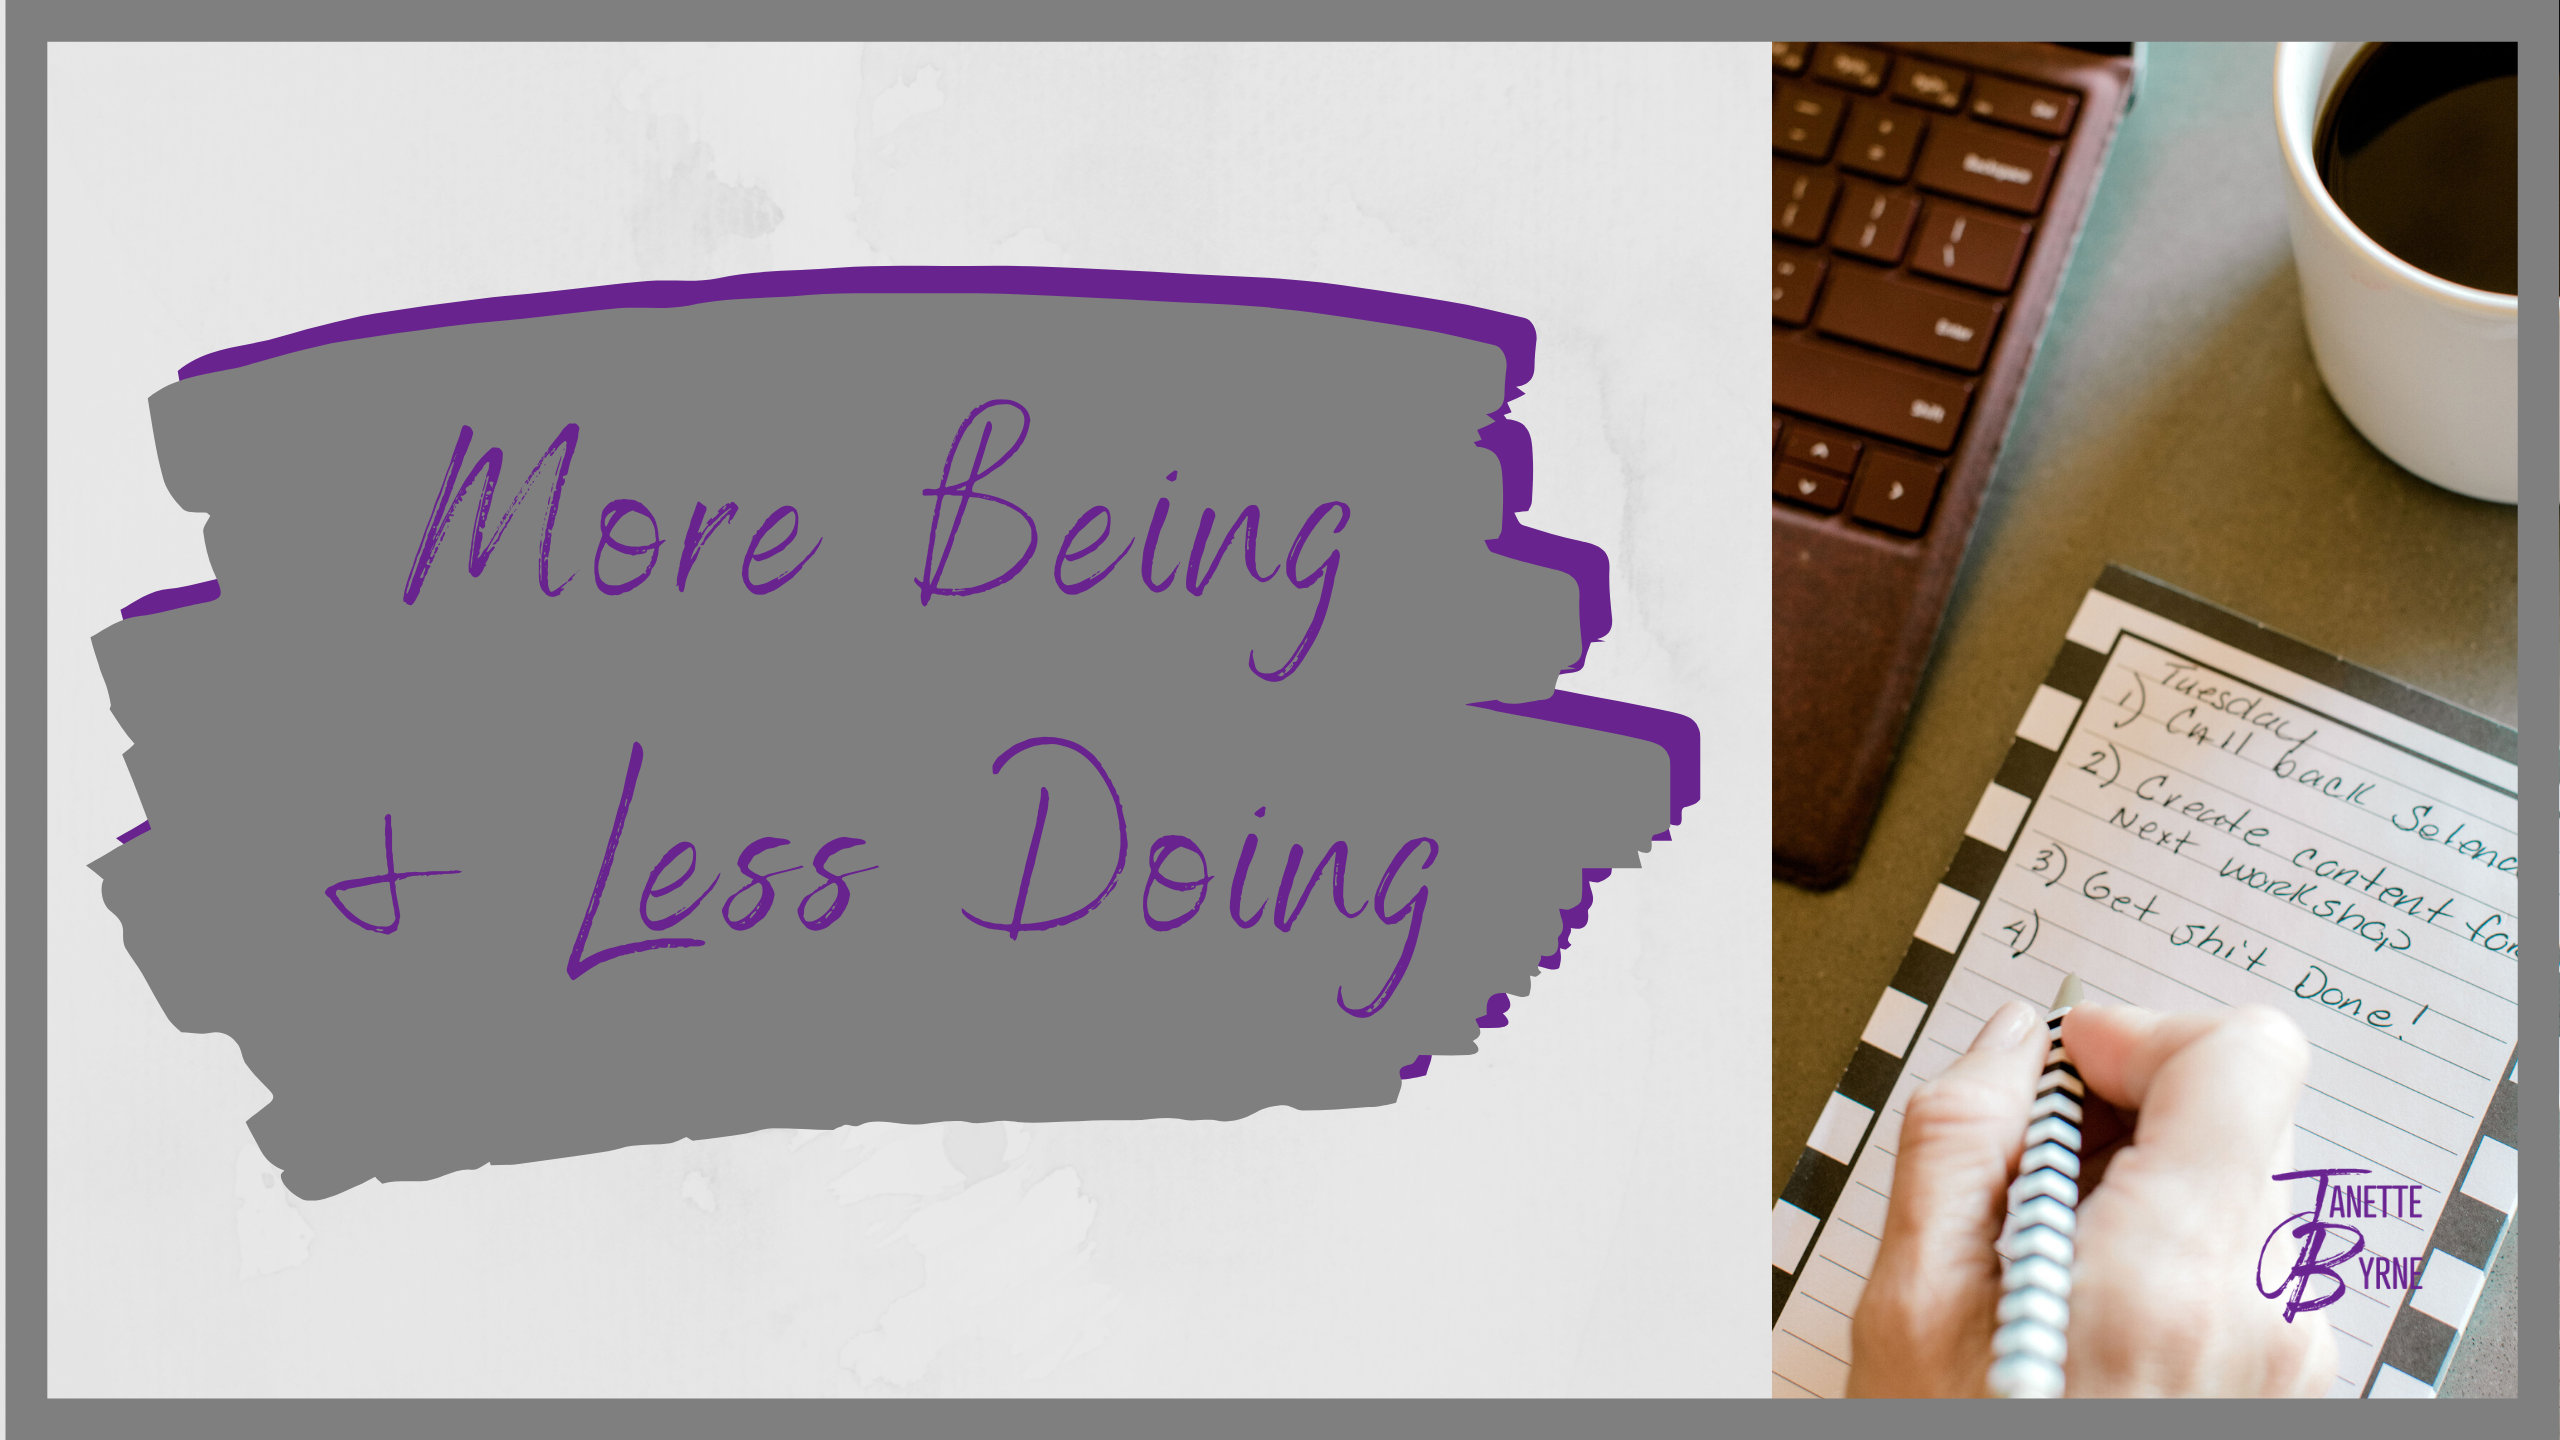 More Being & Less Doing